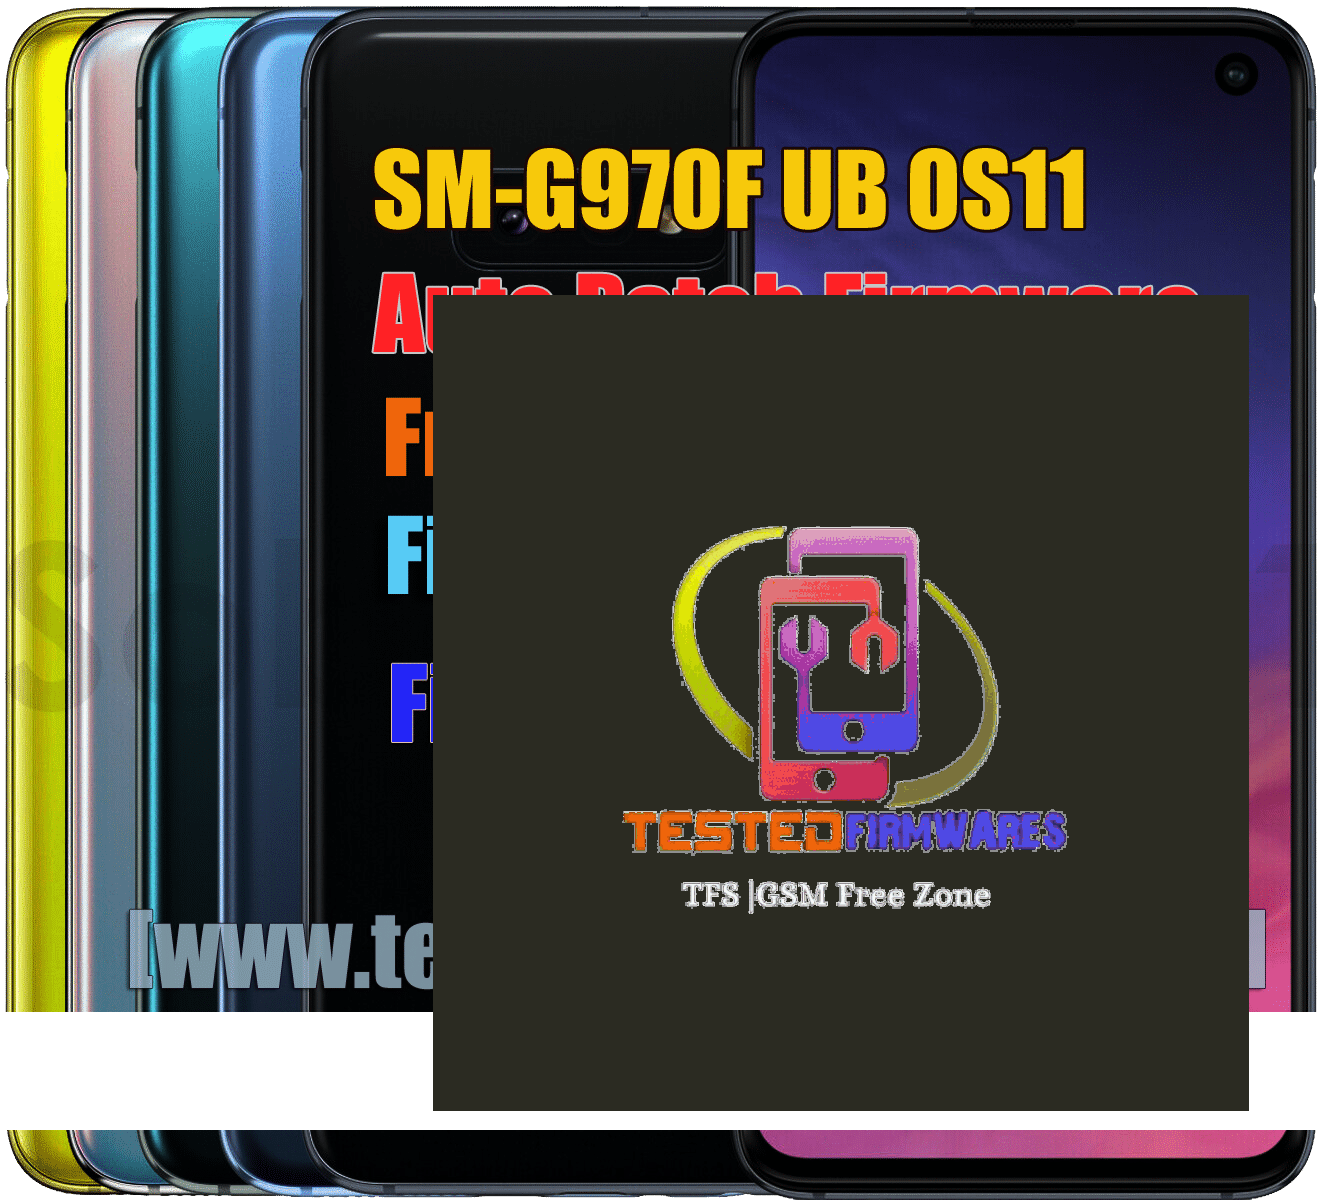 SM-G970F UB OS11 Auto Patch Firmware Free Download By[www.testedfirmwares.com]